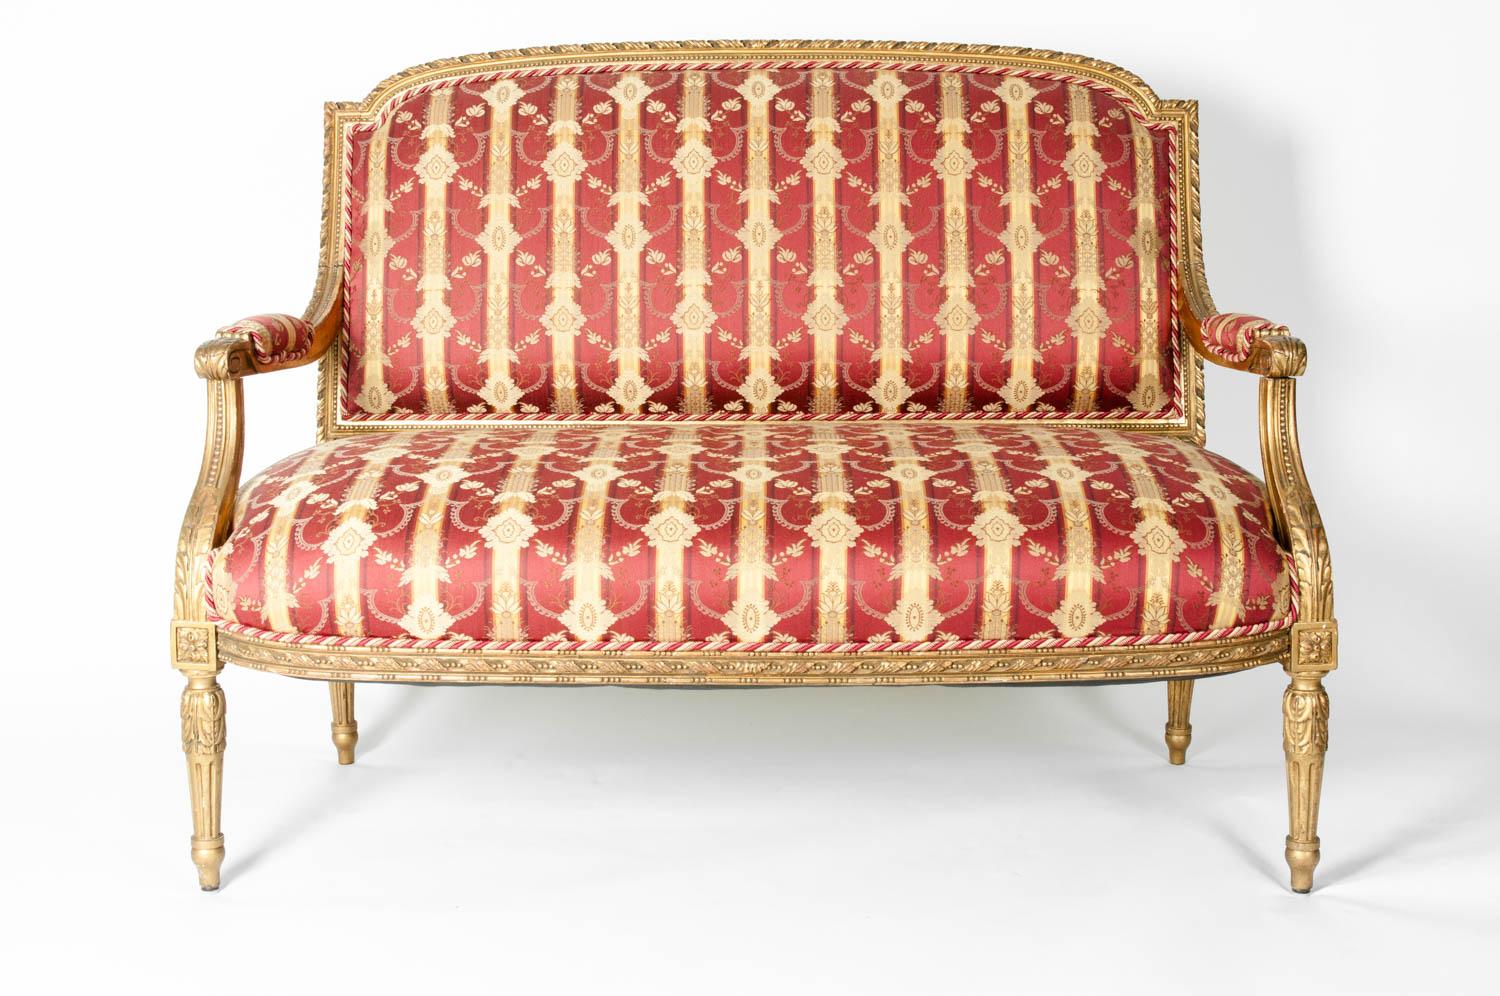 Early 19th century Louis XVI style giltwood framed with silk Damask upholstery settee. The settee is in excellent antique condition, the upholstery is very immaculate. The settee measure 37 inches high x 48 inches width x 25 inches deep. The seat